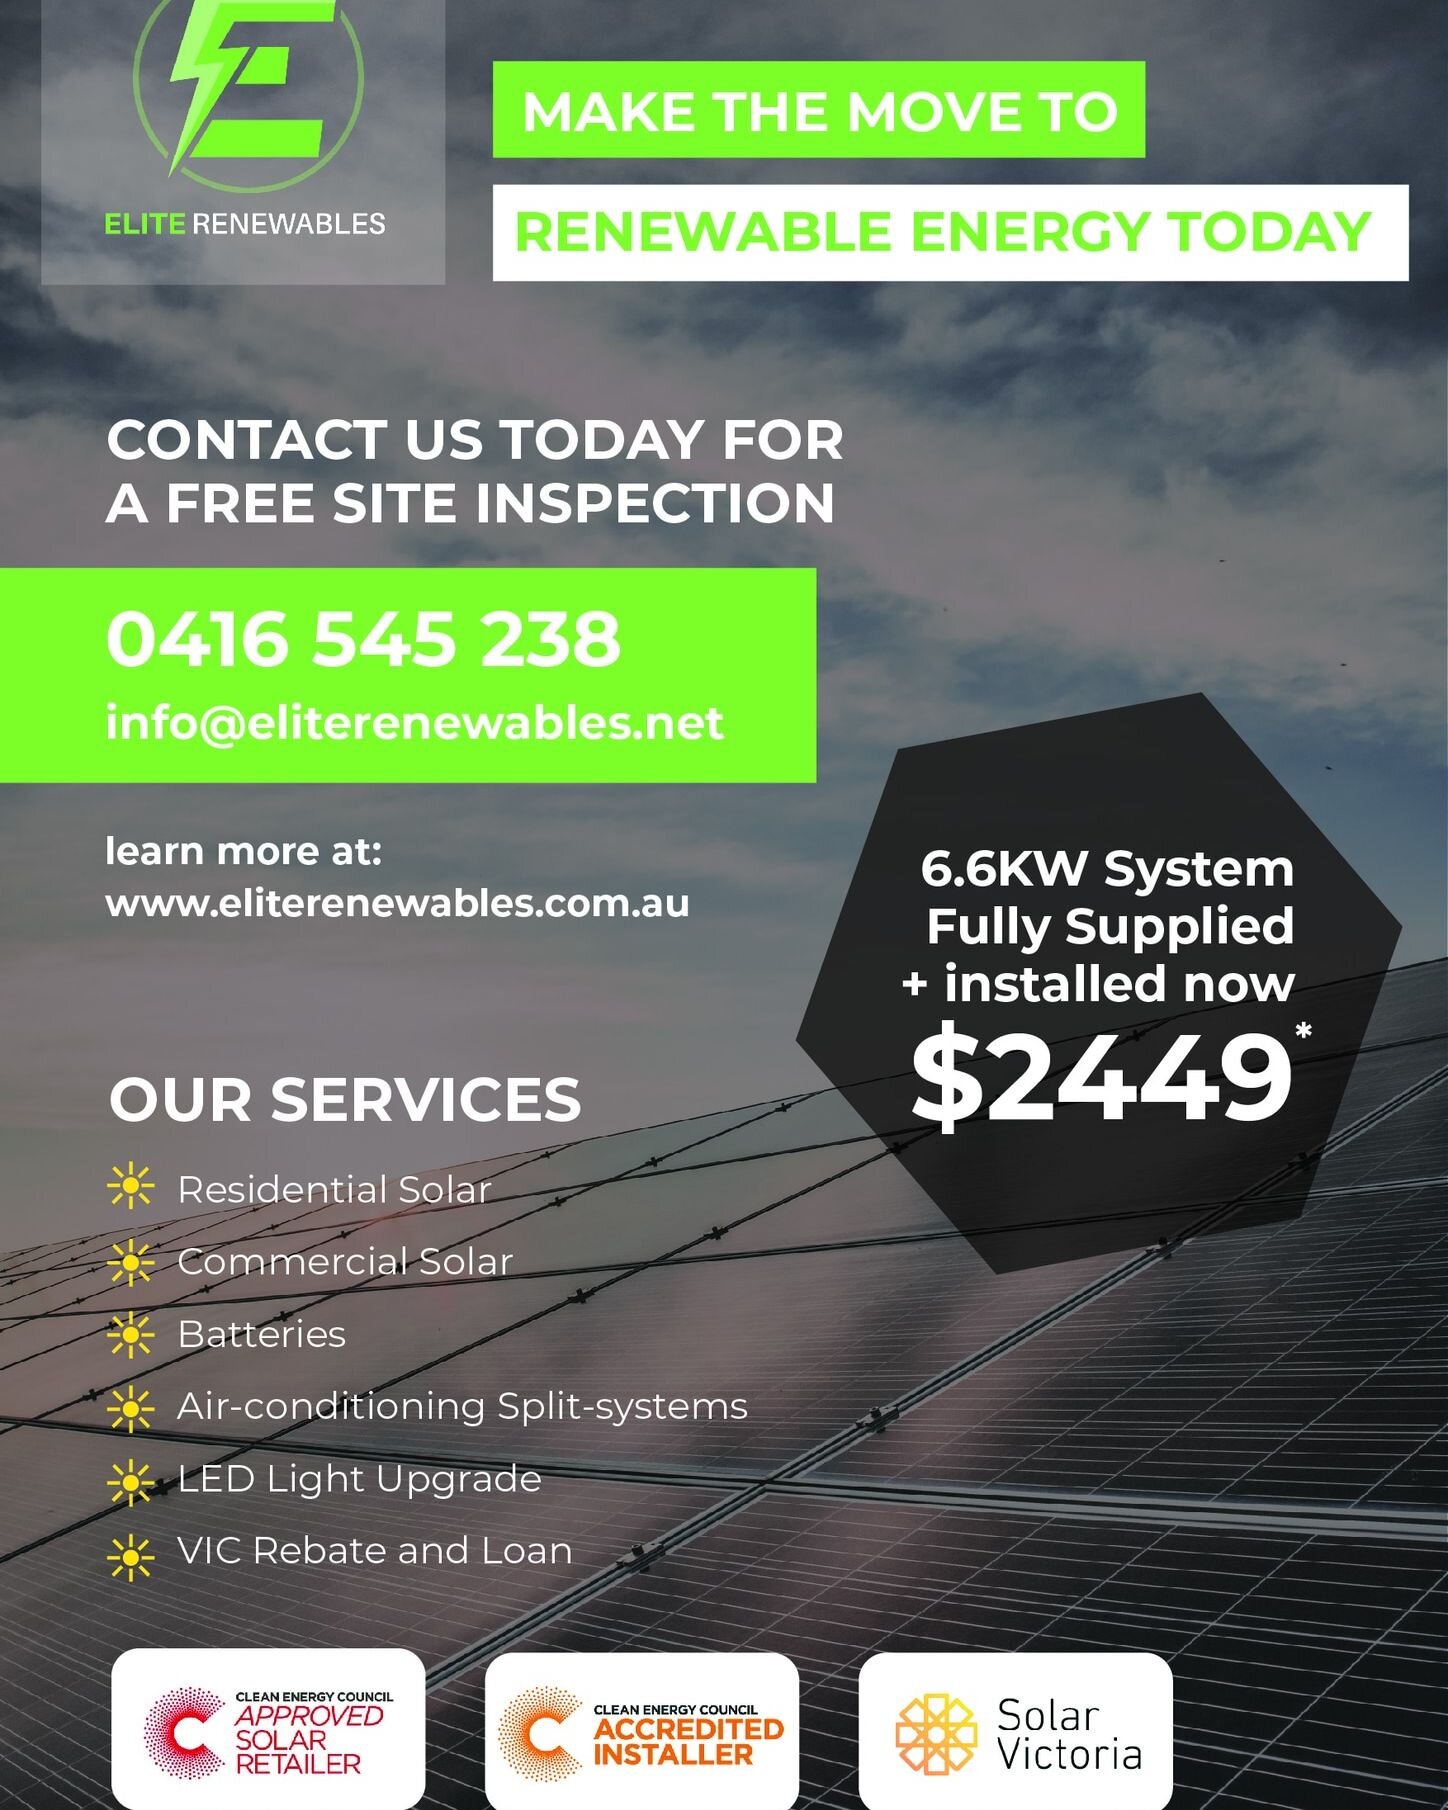 Beat the latest electricity rate hikes! Make the move to renewable energy to power your home and start saving now! Visit www.eliterenewables.com.au to find out more.